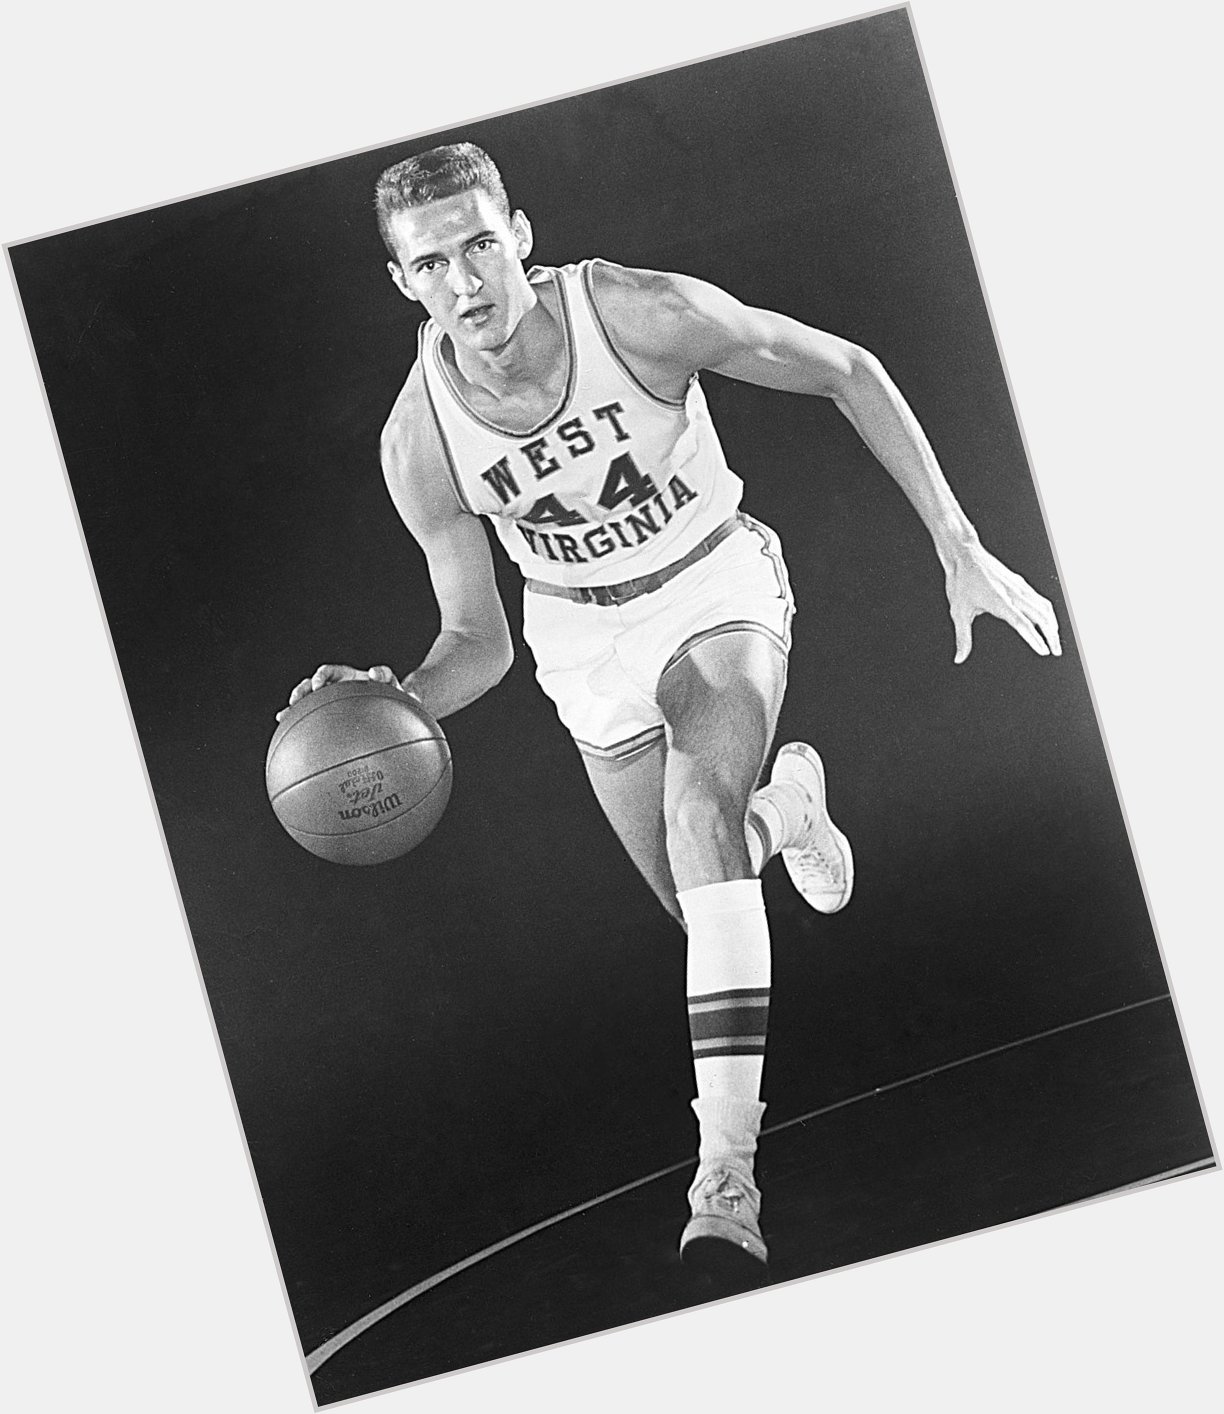 A legend in every aspect of the game. We want to wish a very happy 83rd birthday to Jerry West!   